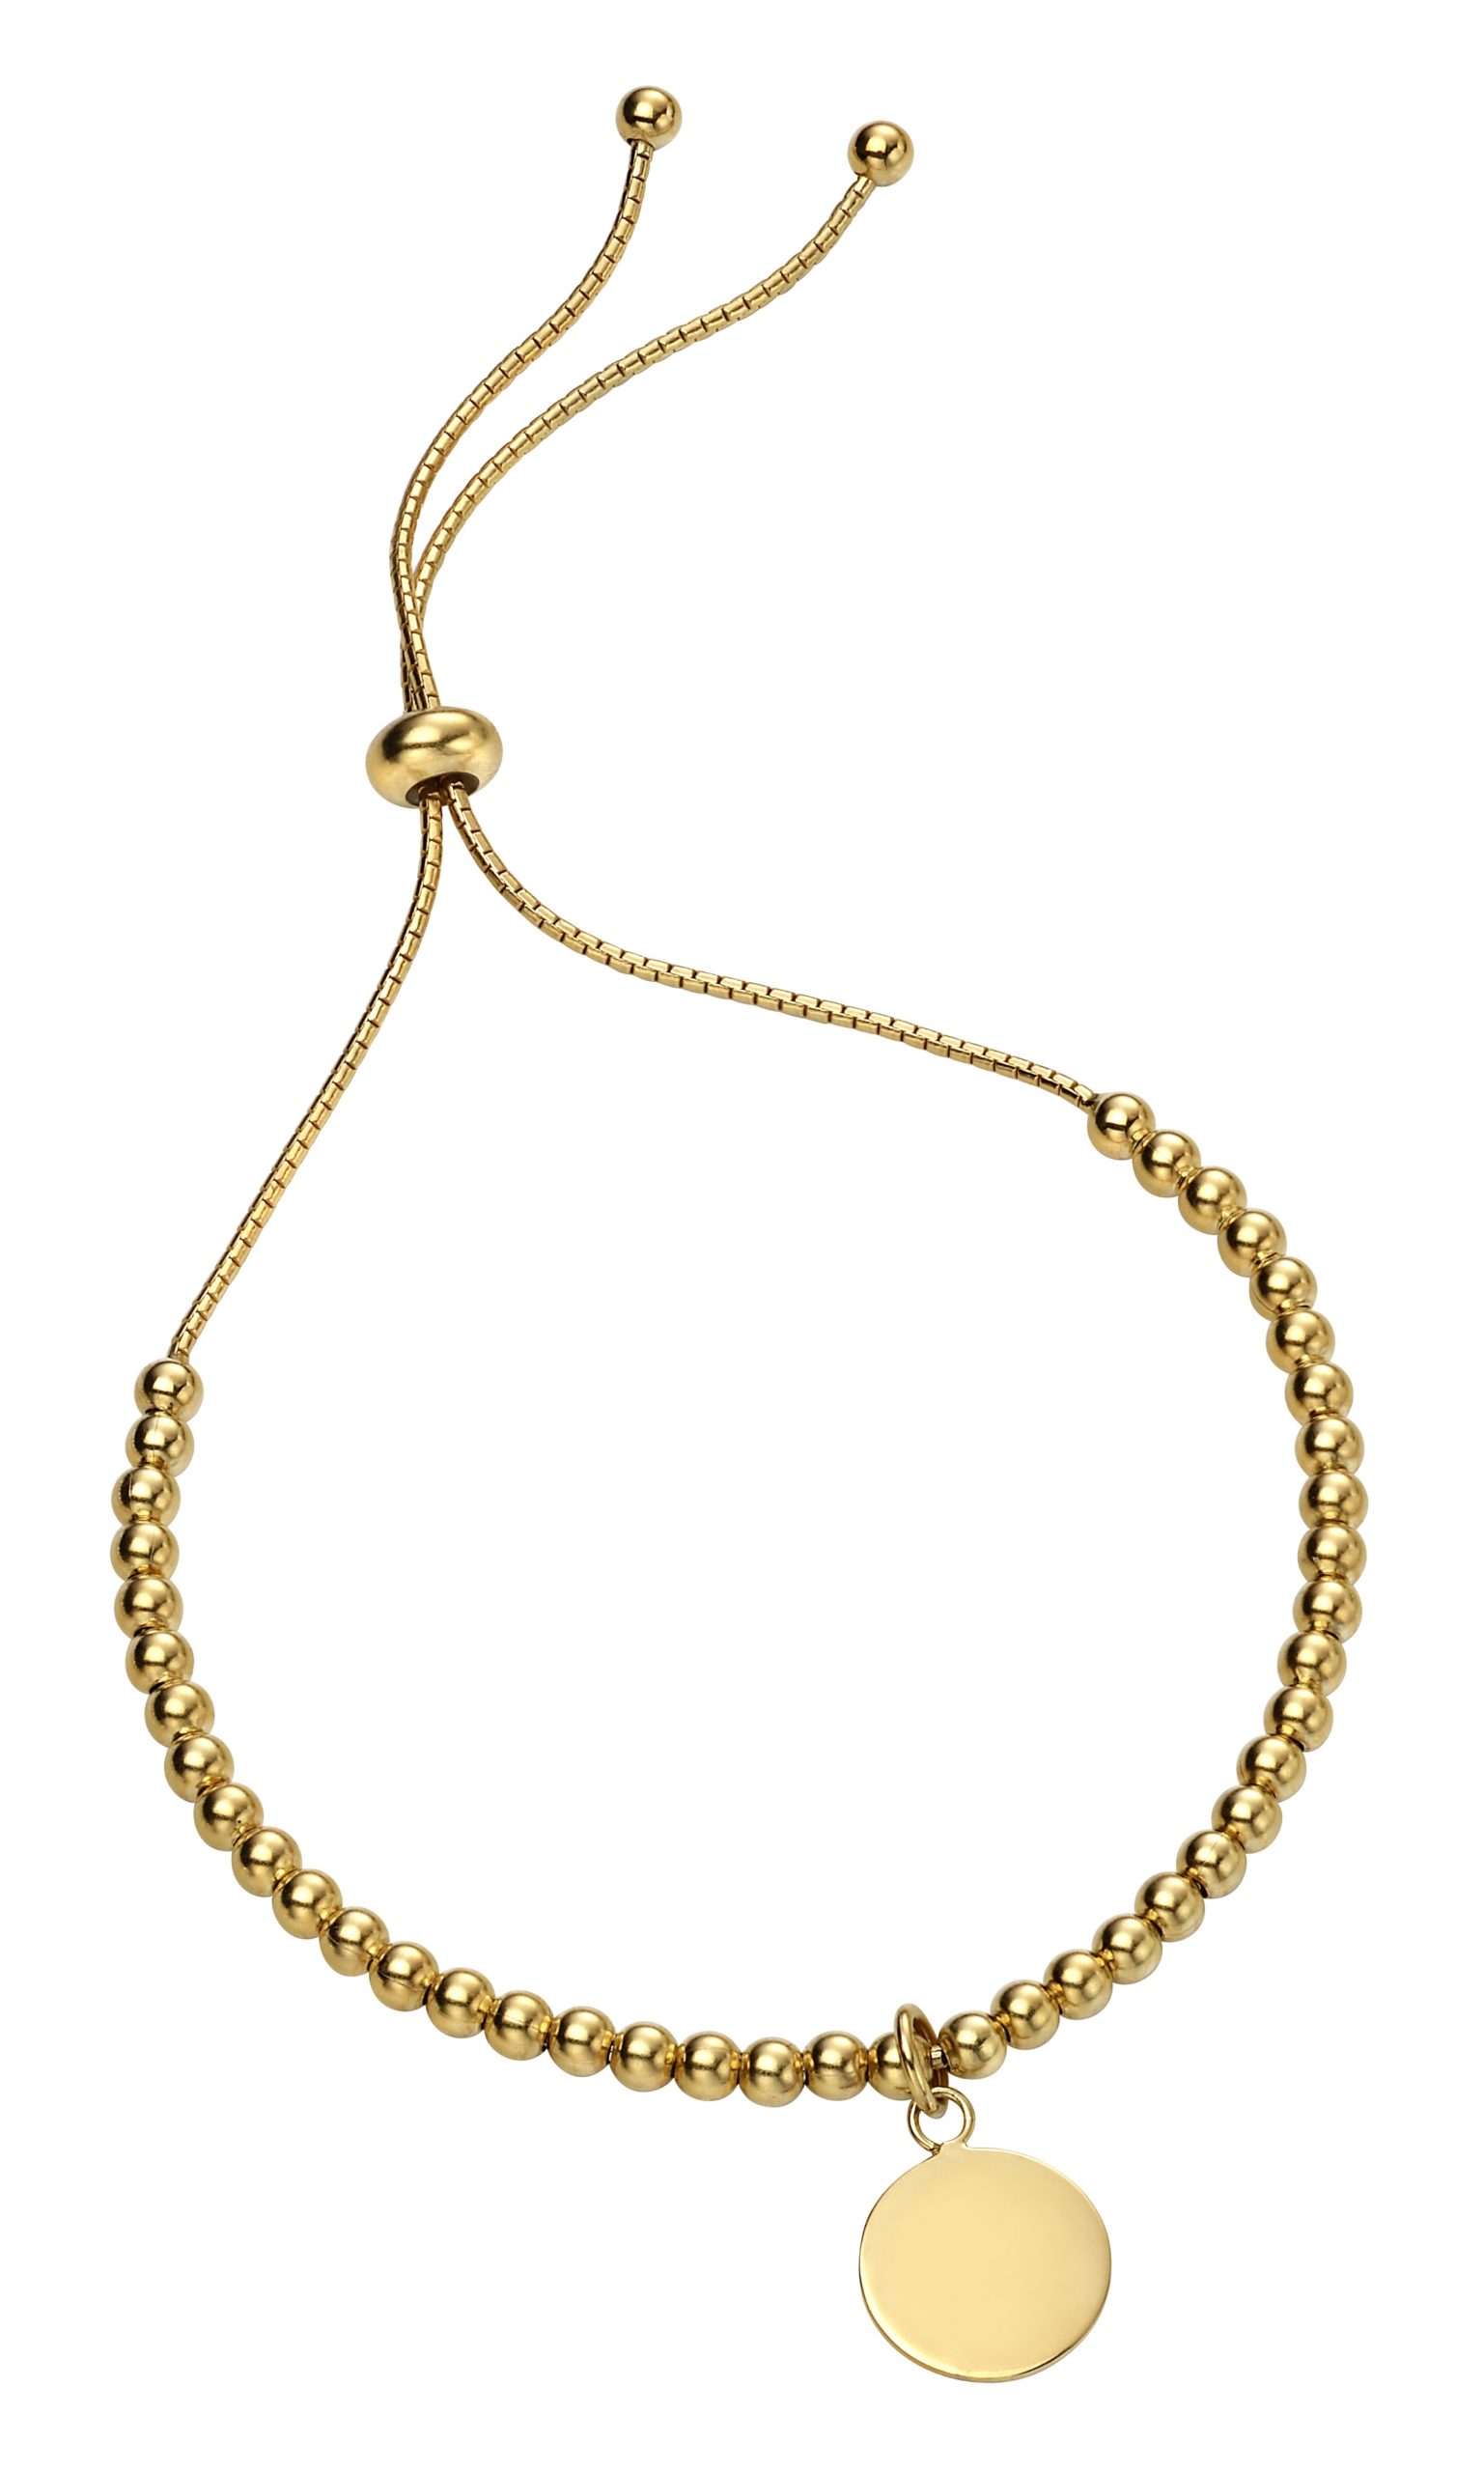 Silver Gold Plated Ball Toggle Disc Bracelet | Hoppers Jewellers